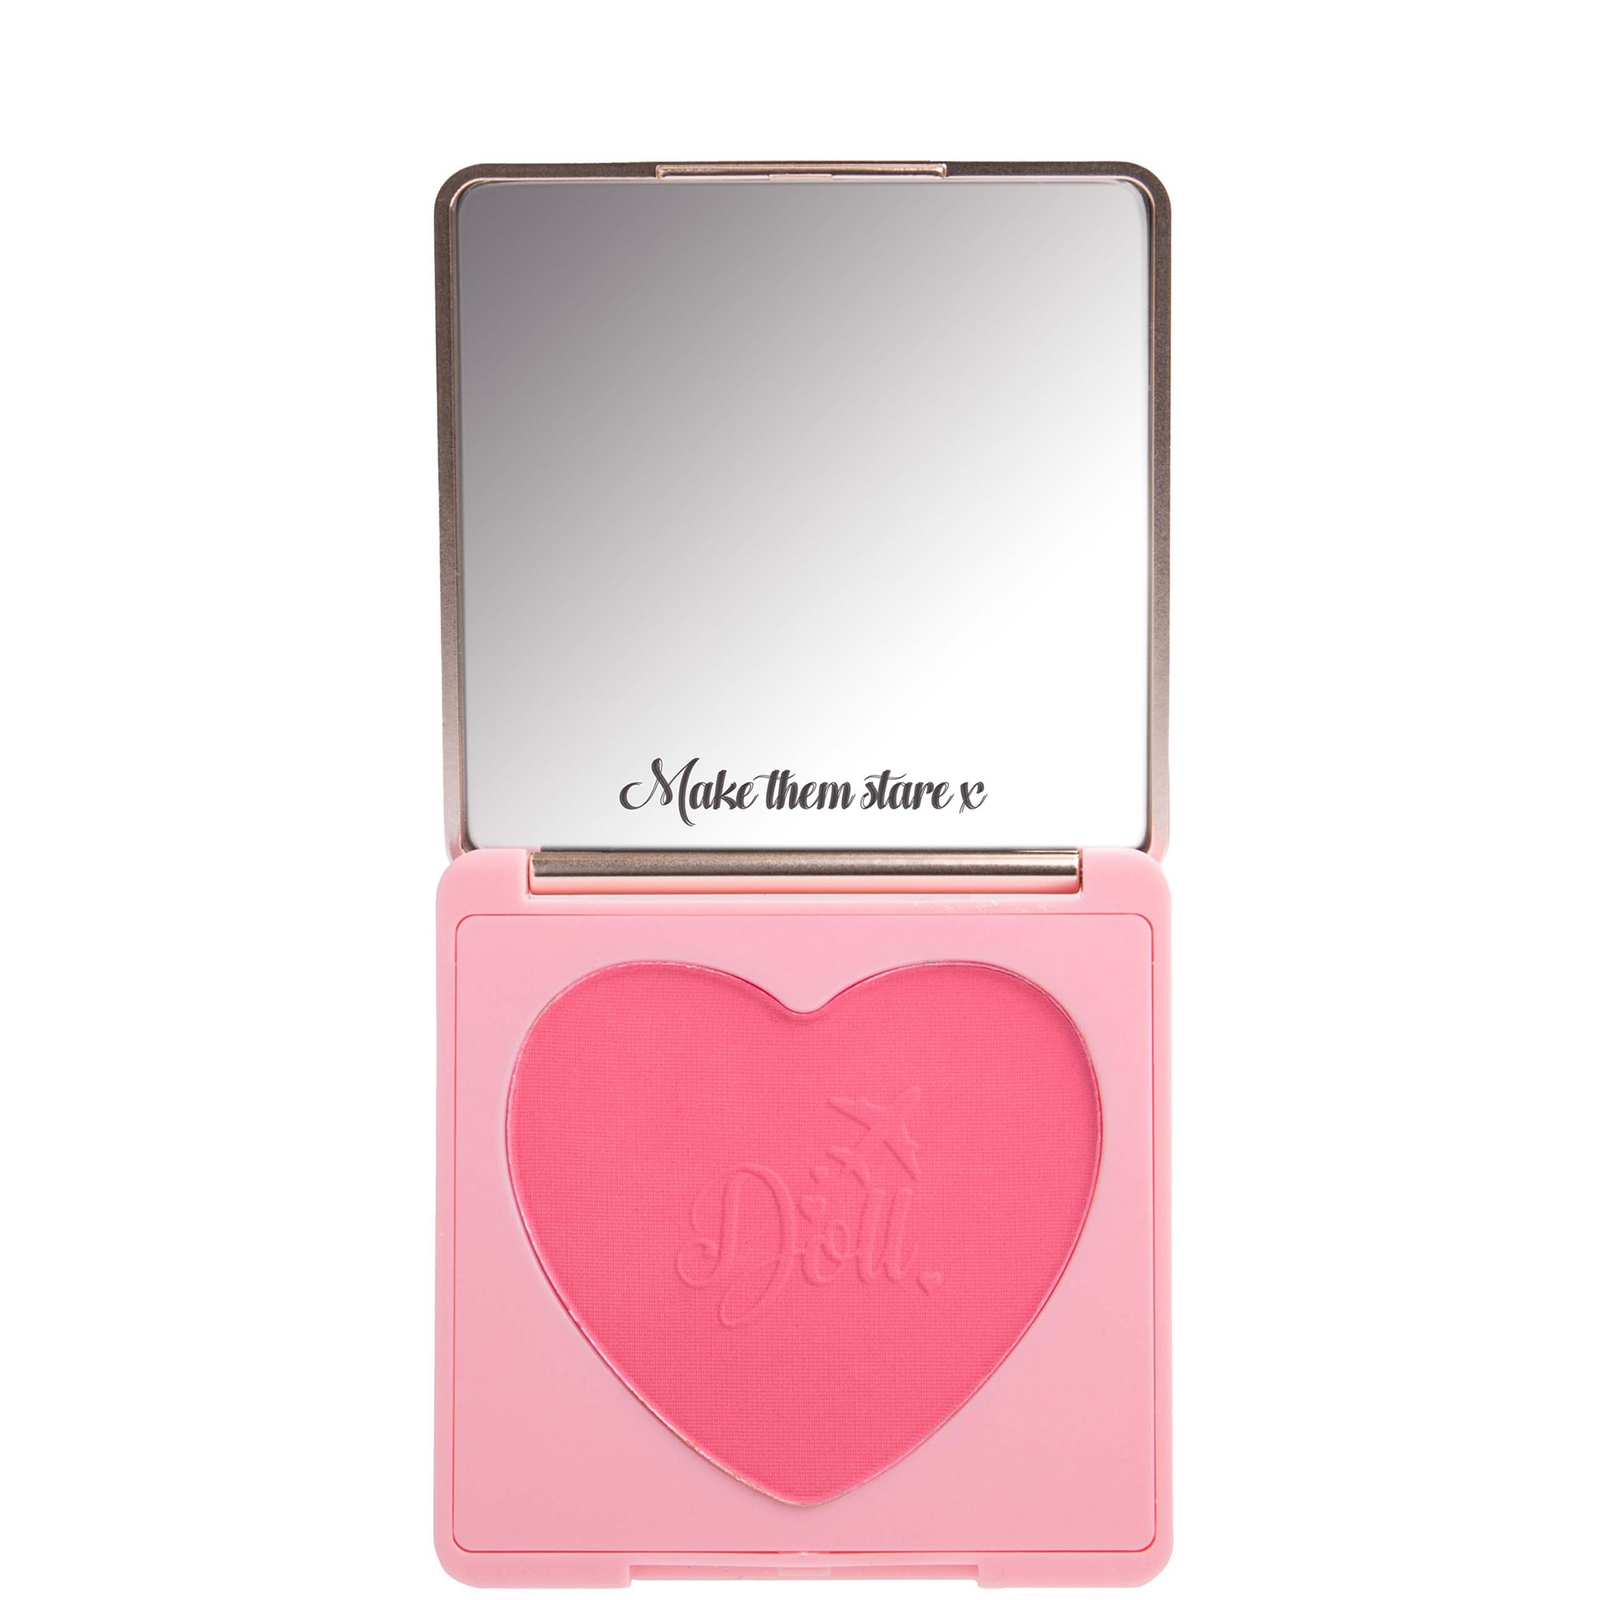 Doll Beauty Blusher 6g (Various Shades) - Let's Get Wavy